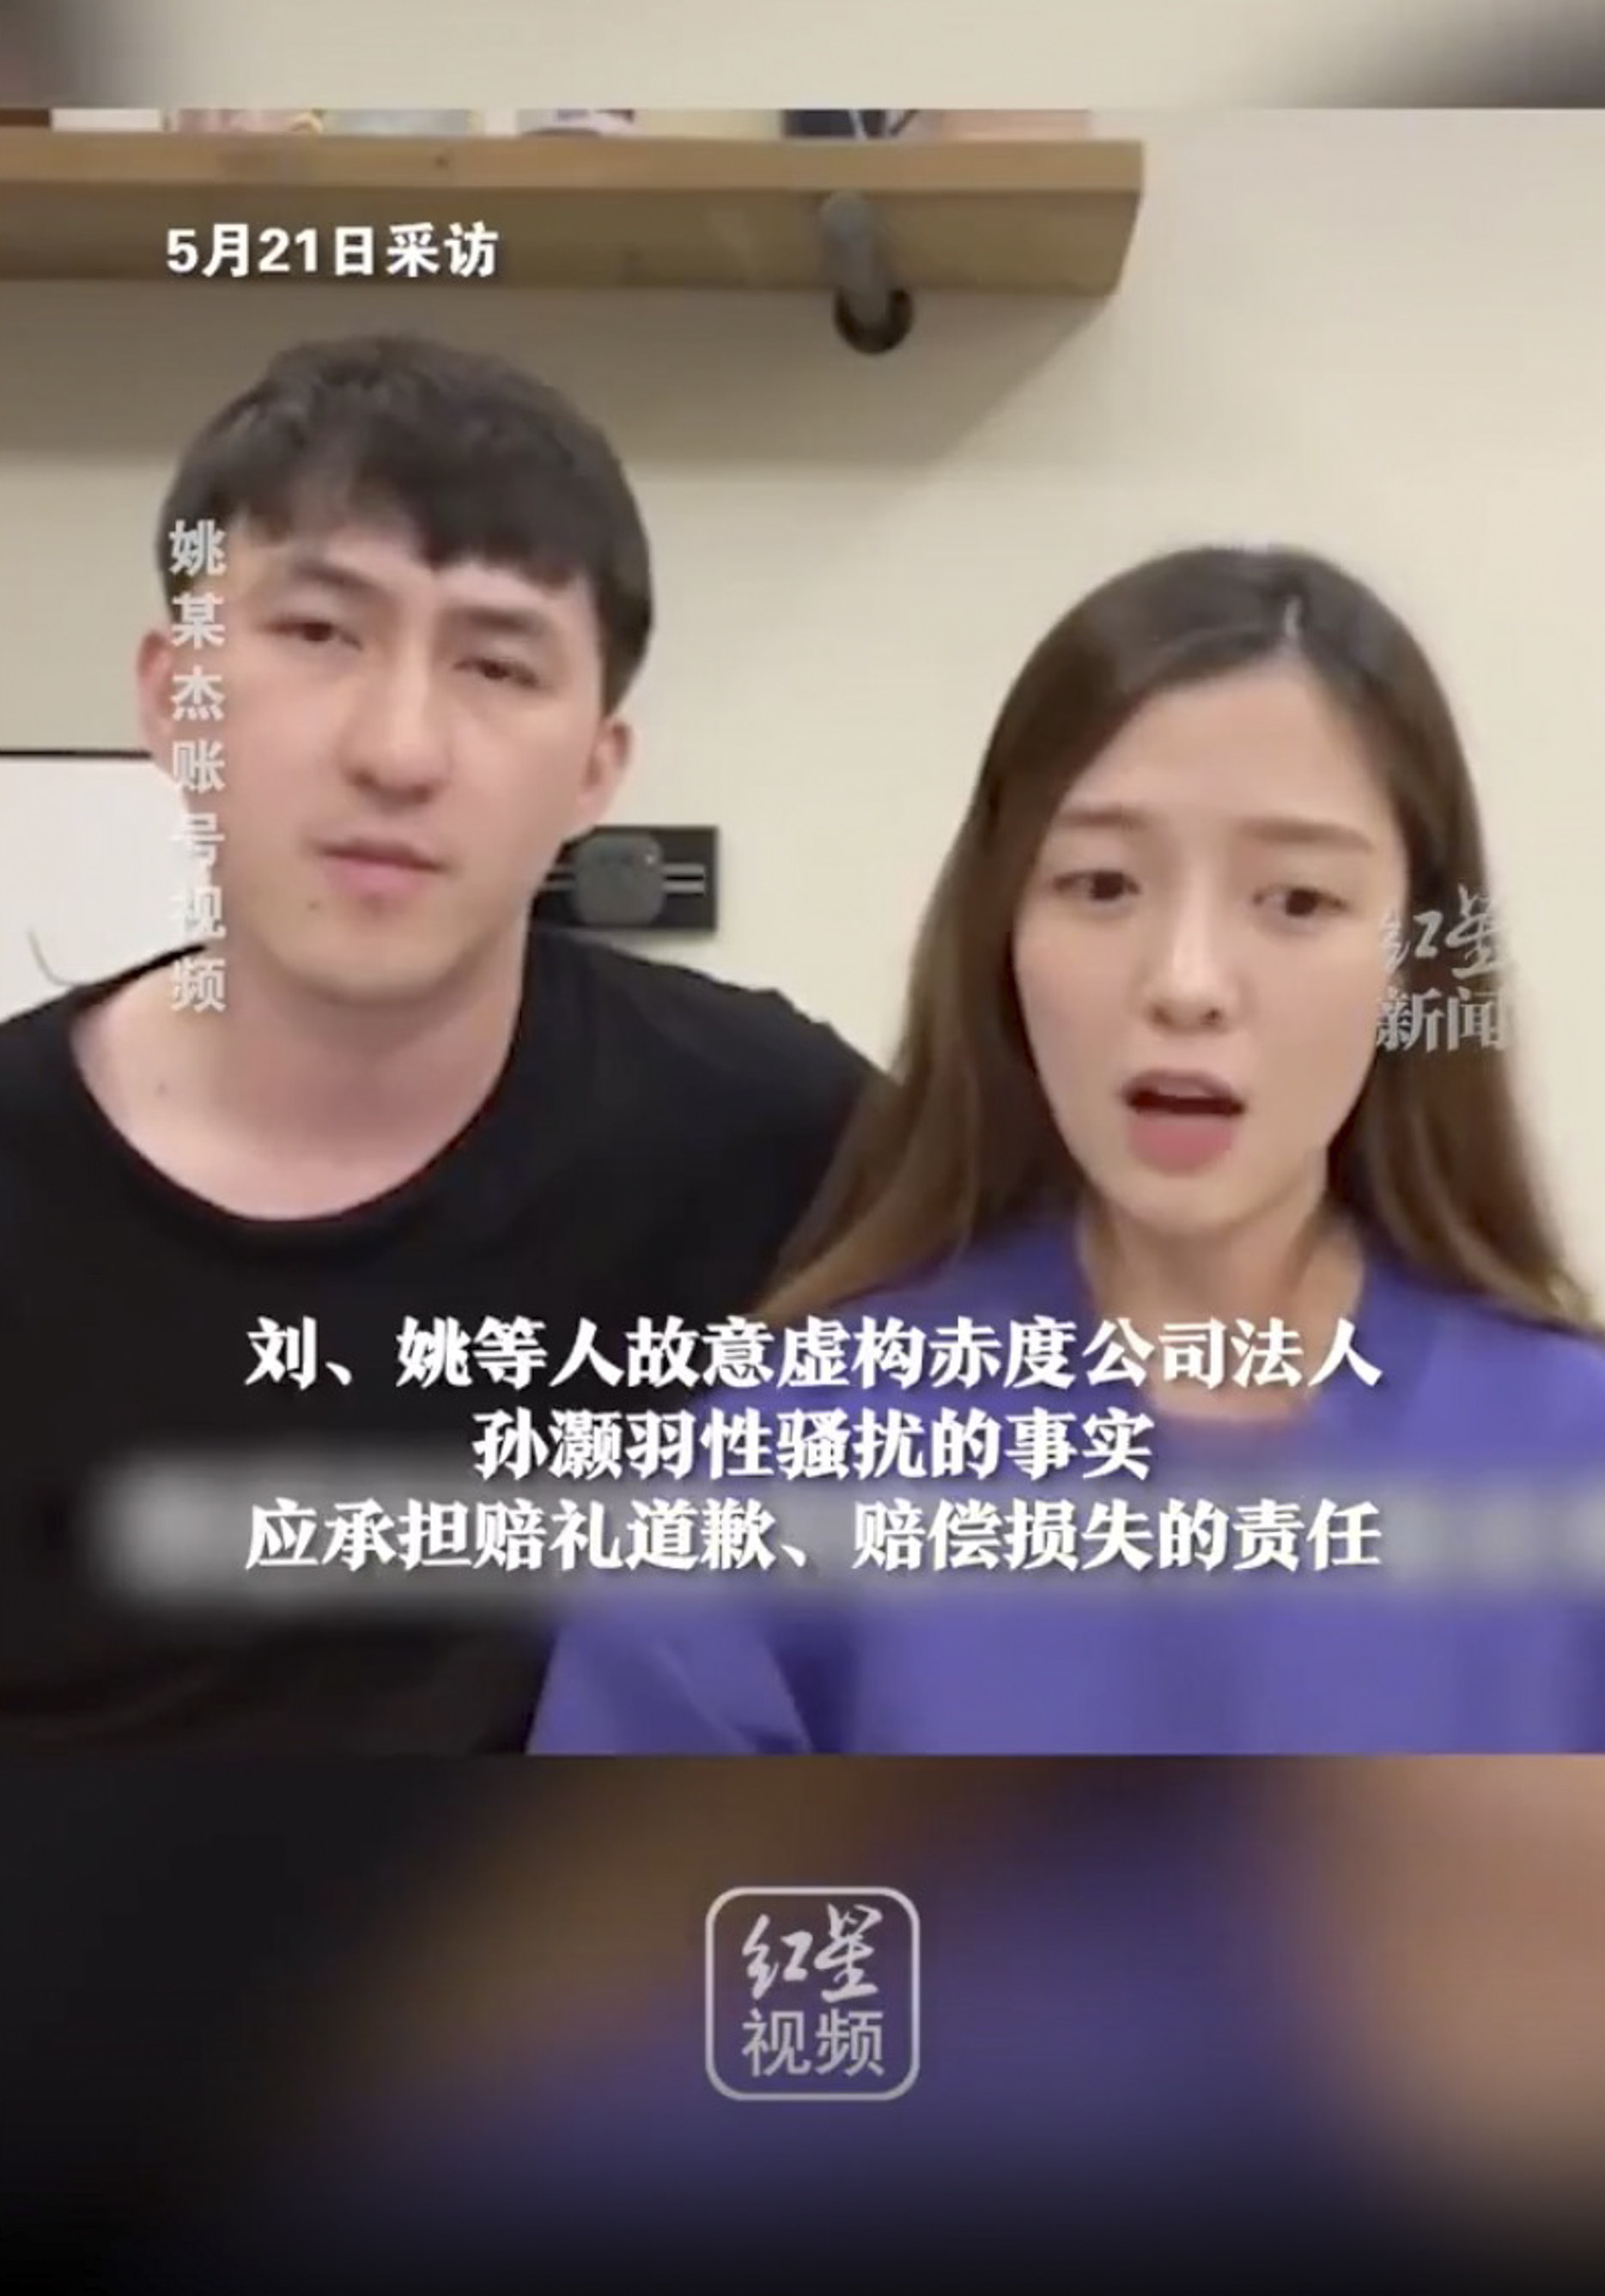 Chinese influencer, Yao, and his wife, Chen, also an influencer, were key members of the conspiracy to make the false allegations. Photo: Weibo